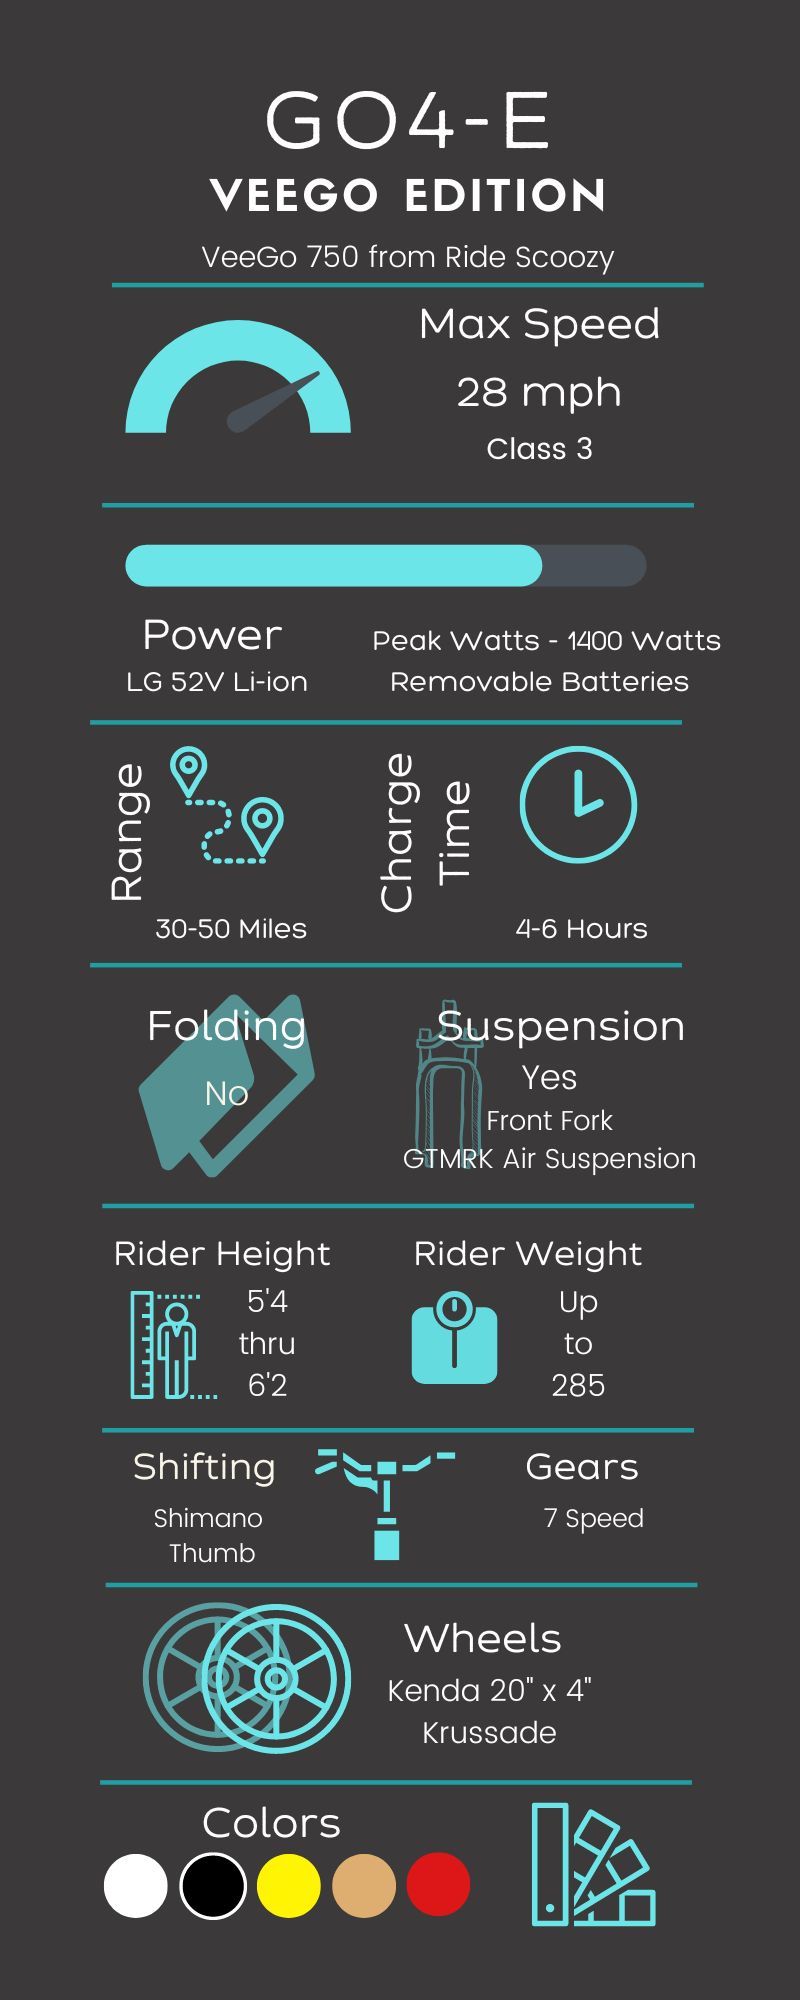 Infographic about the VeeGo 750 eBike from Ride Scoozy that is compatible with the Go4-E Connection Kit to create a Blackbird Bikes Sociable Tandem side-by-side quadribike. This 4 wheel bicycle offers a stable ride inclusive for all abilities and adaptive to special needs riders.